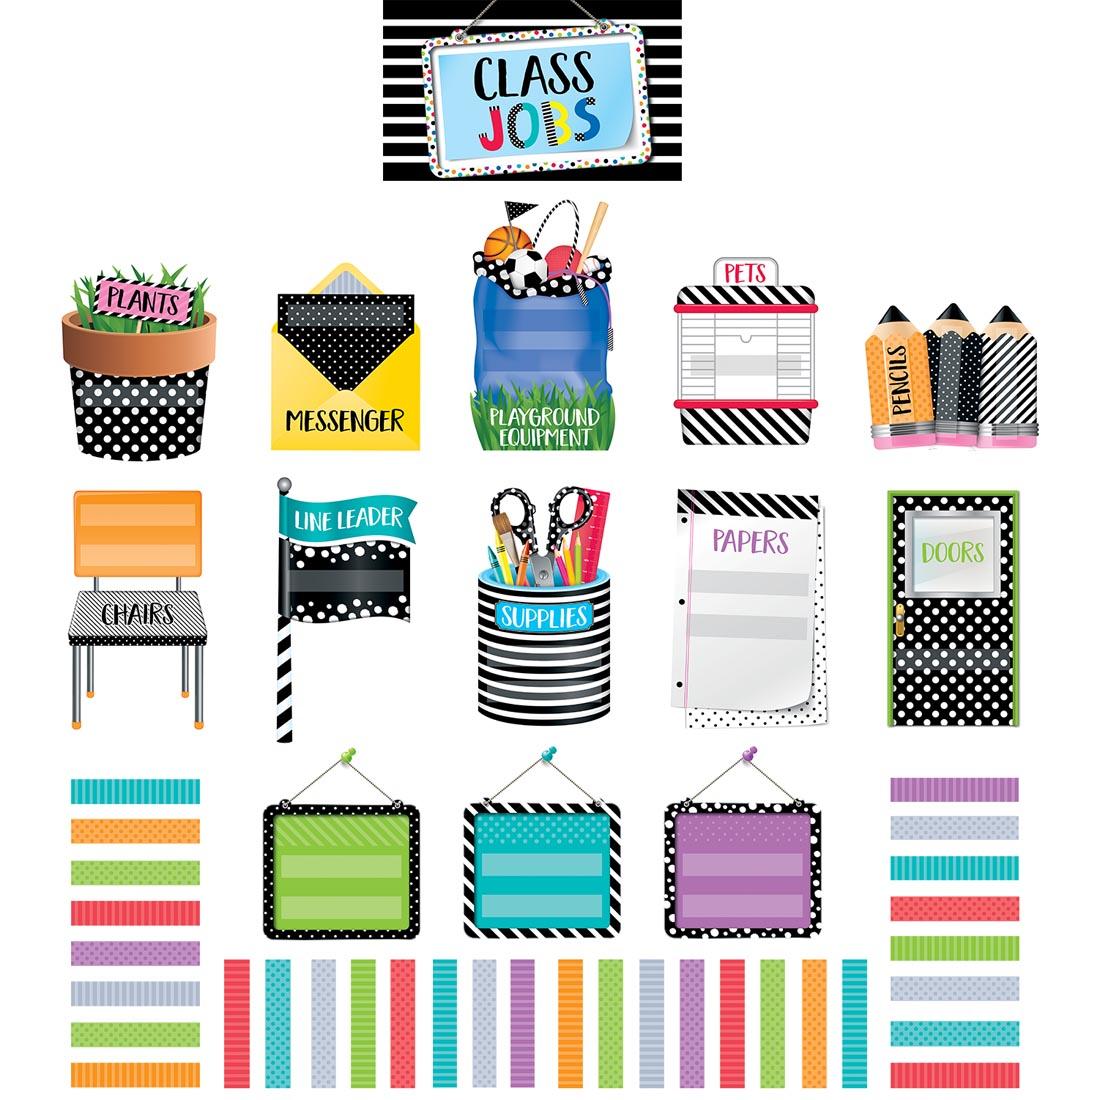 Class Jobs Mini Bulletin Board Set from the Bold & Bright collection by Creative Teaching Press